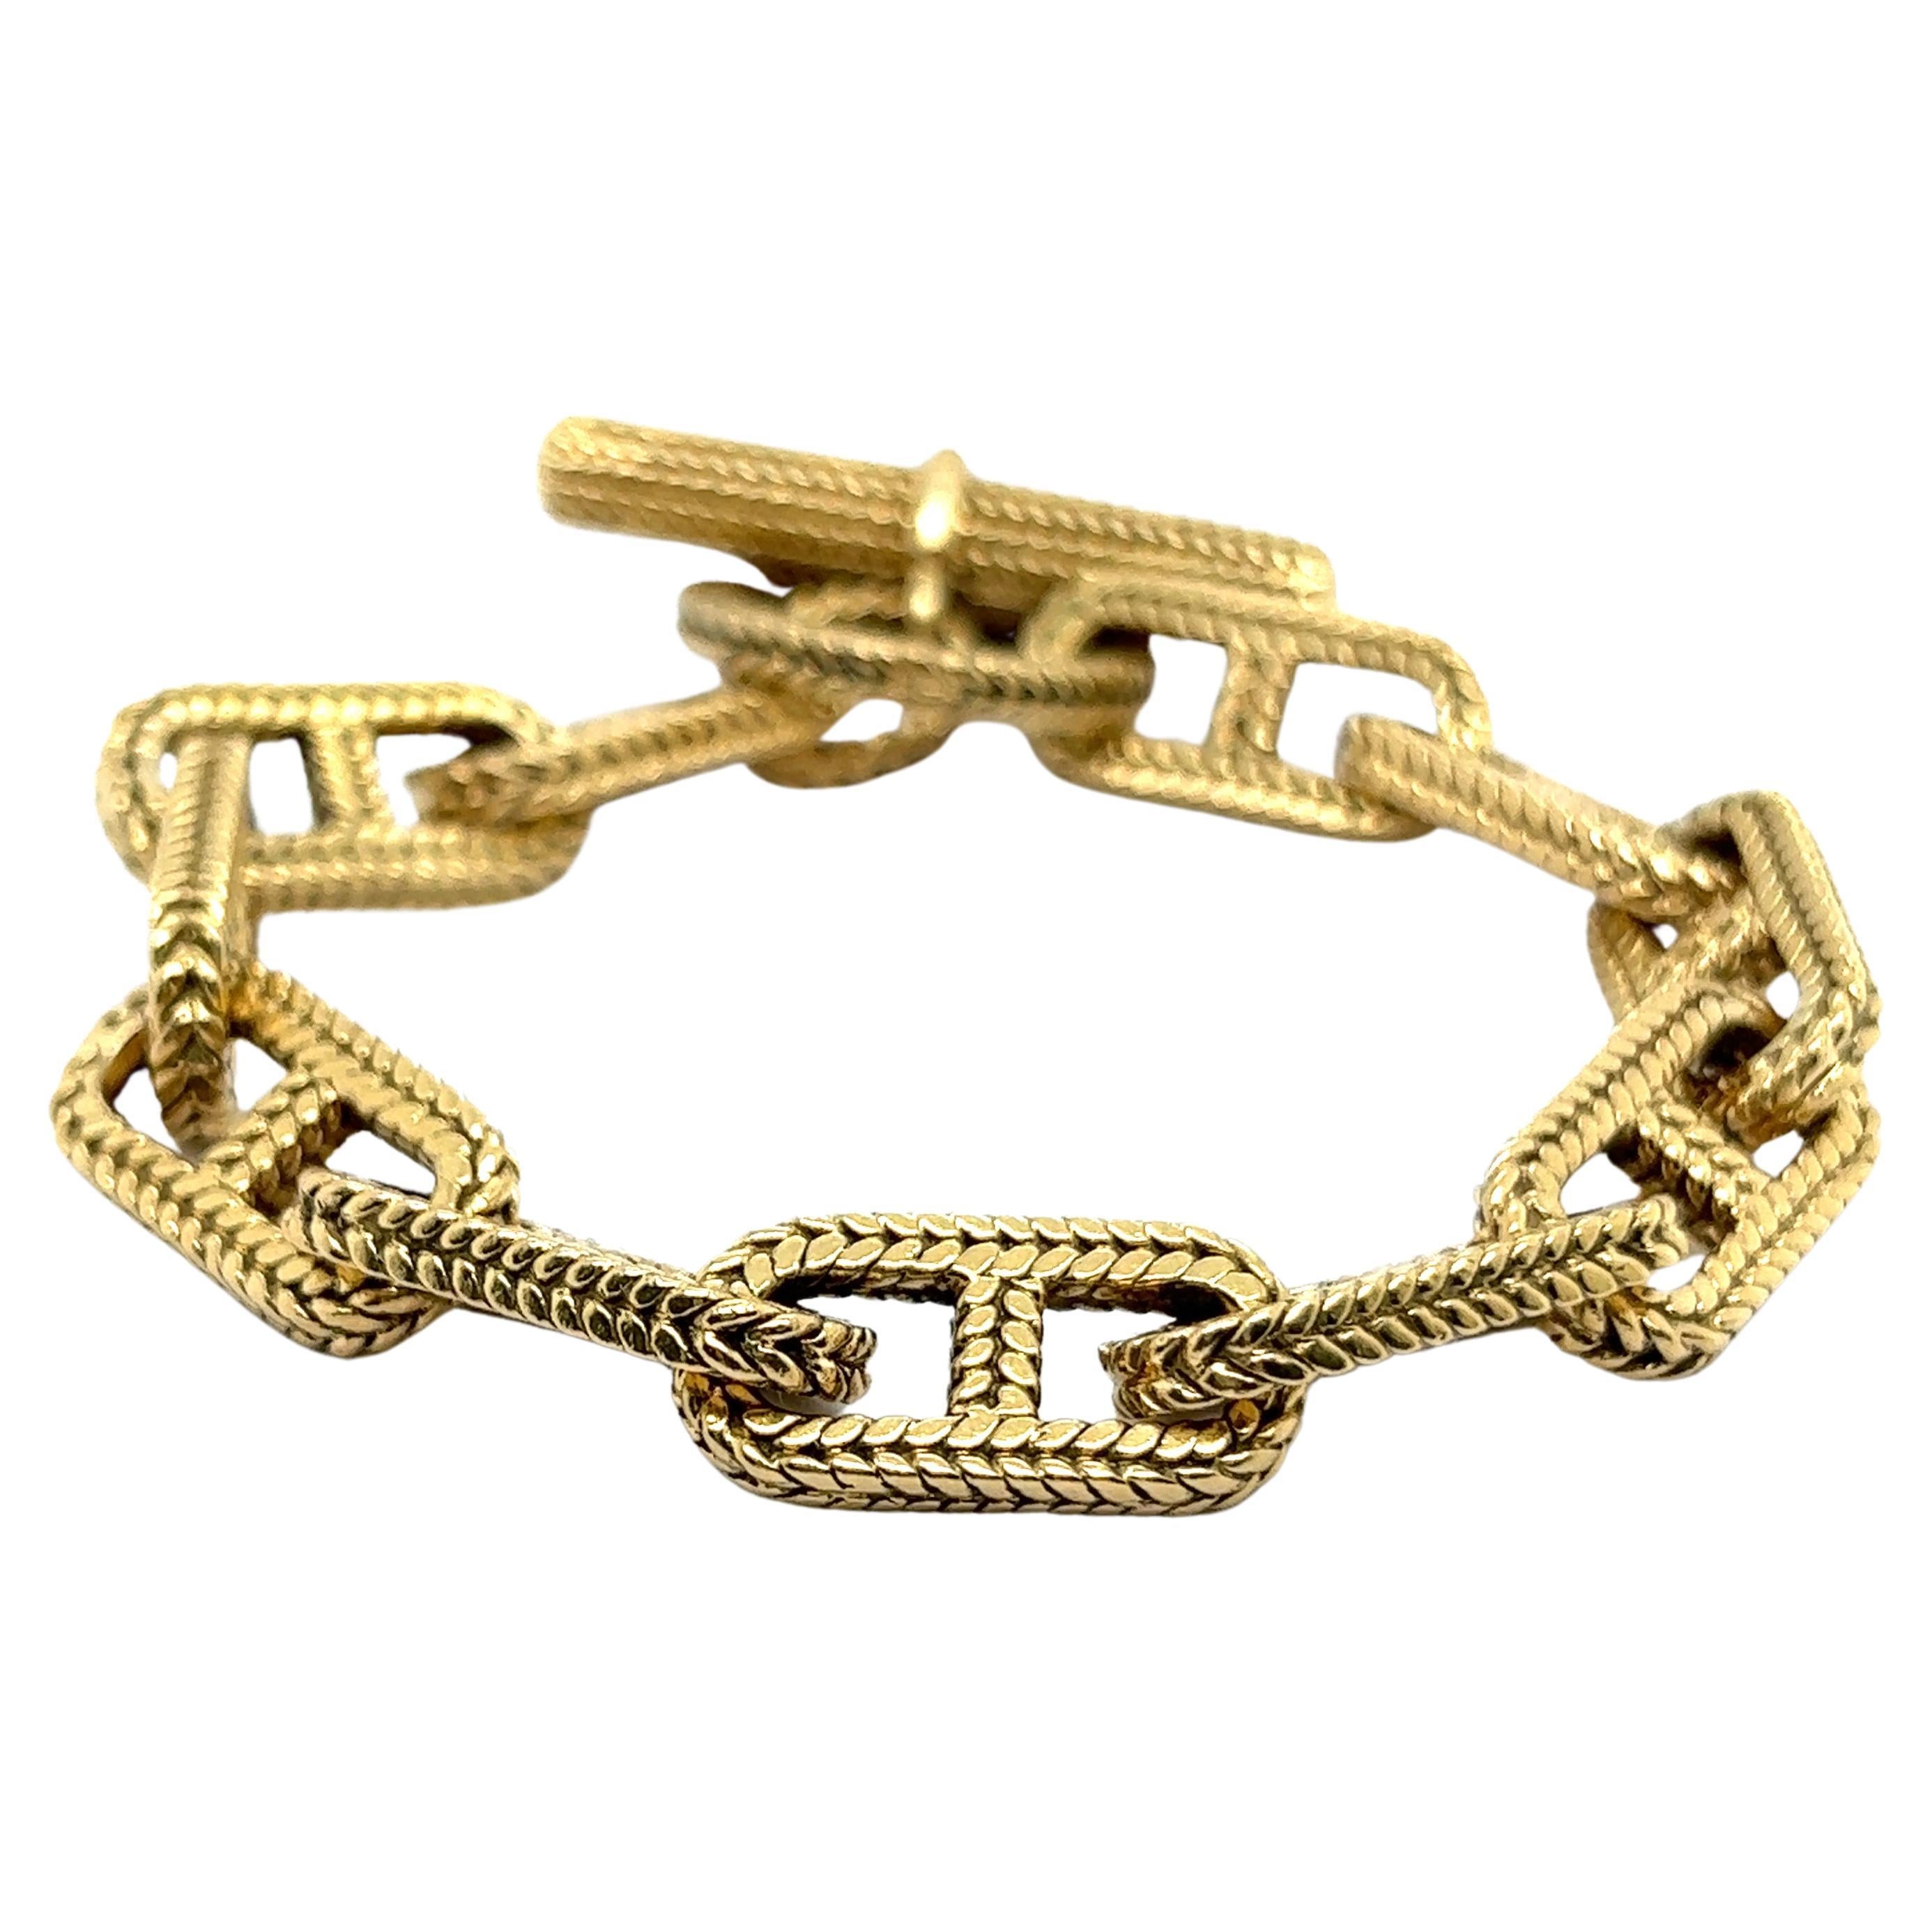 Chain Bracelet “Chaine D'ancre” in 18 Karat Yellow Gold